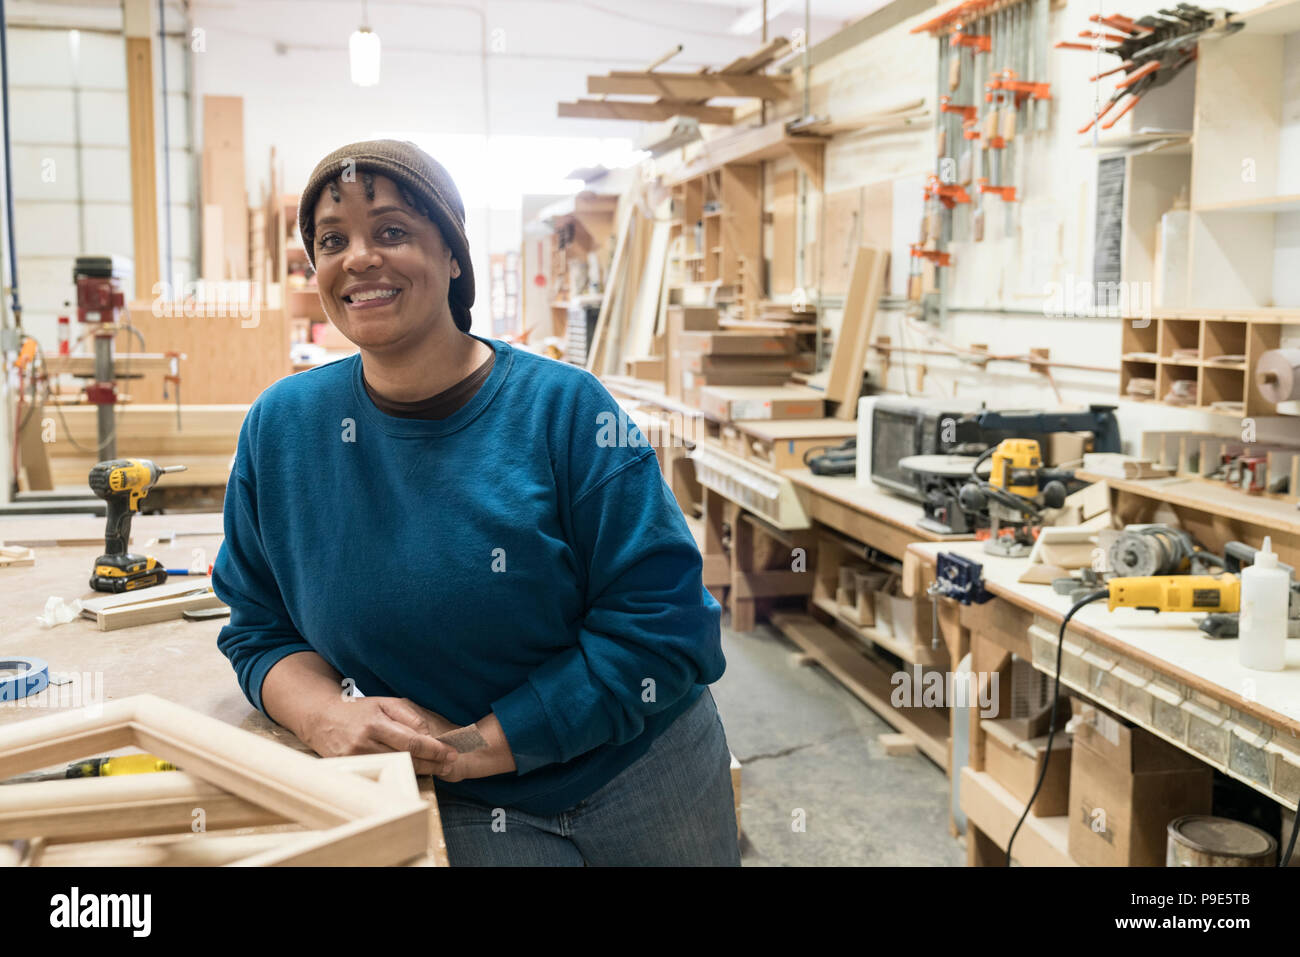 Portrait Of A Black Woman Carpenter In A Large Woodworking Shop Stock Photo Alamy